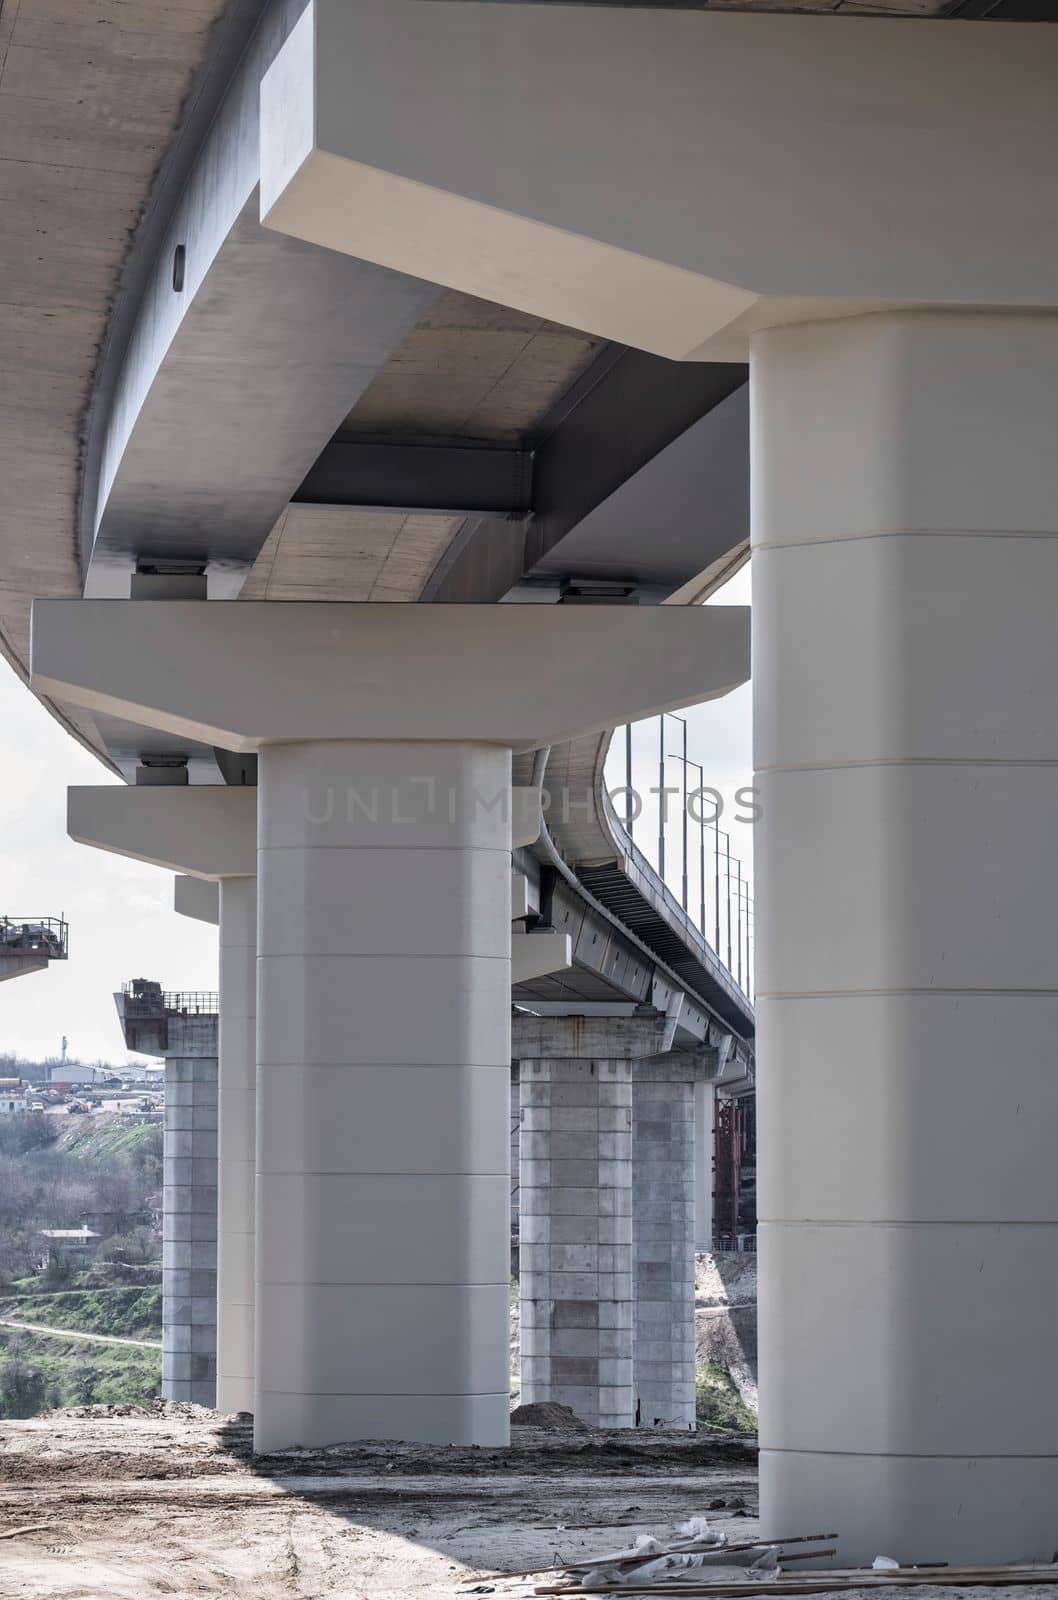 Pillar of bridge. Underside of an elevated roads. Gray pillars support the weight of the structure. Vital part of infrastructure. download image